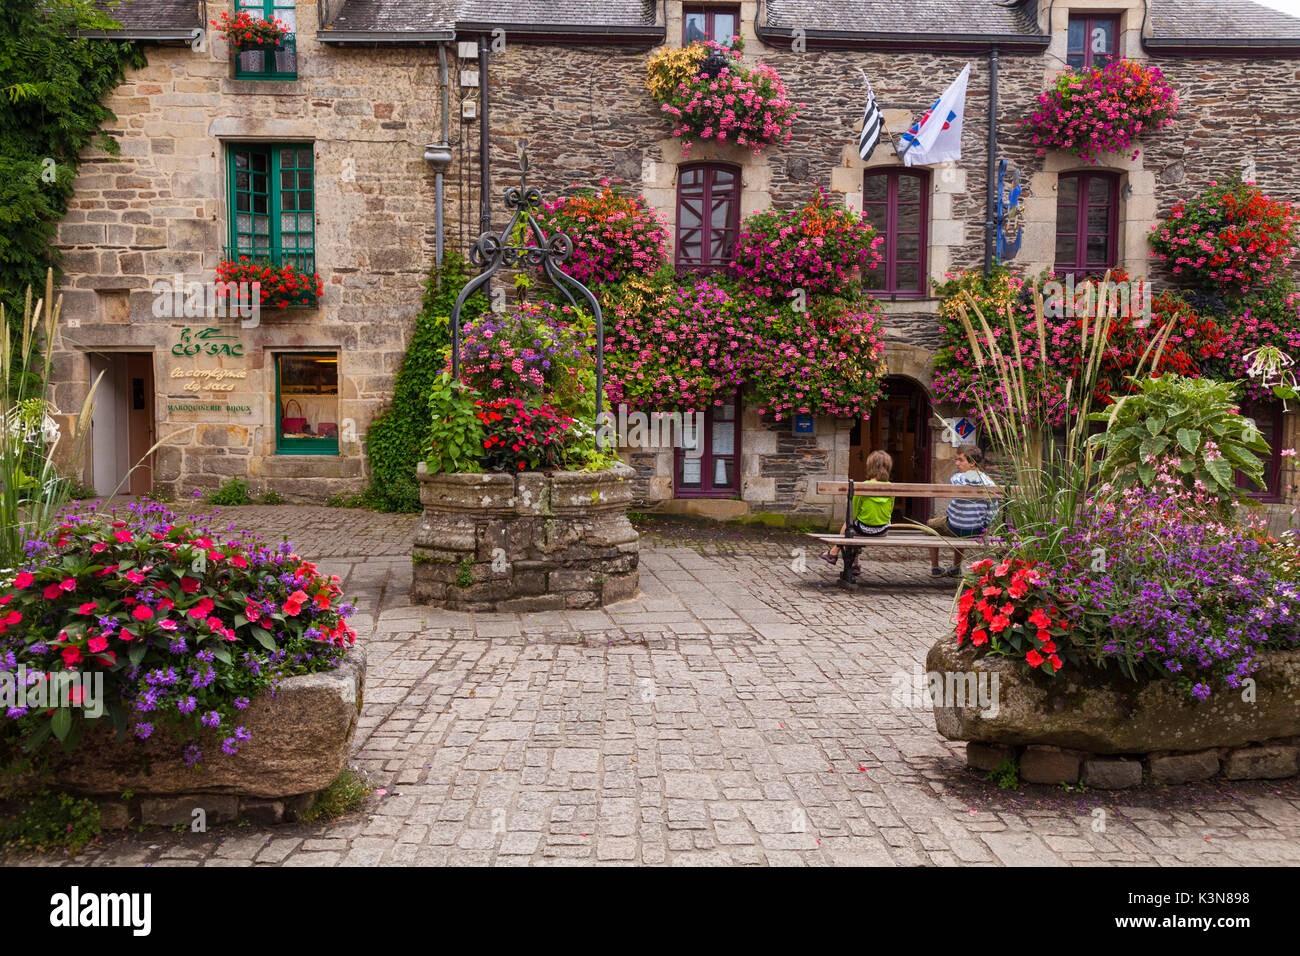 Rochefort en Terre, Brittany, France, View of historical center Stock Photo